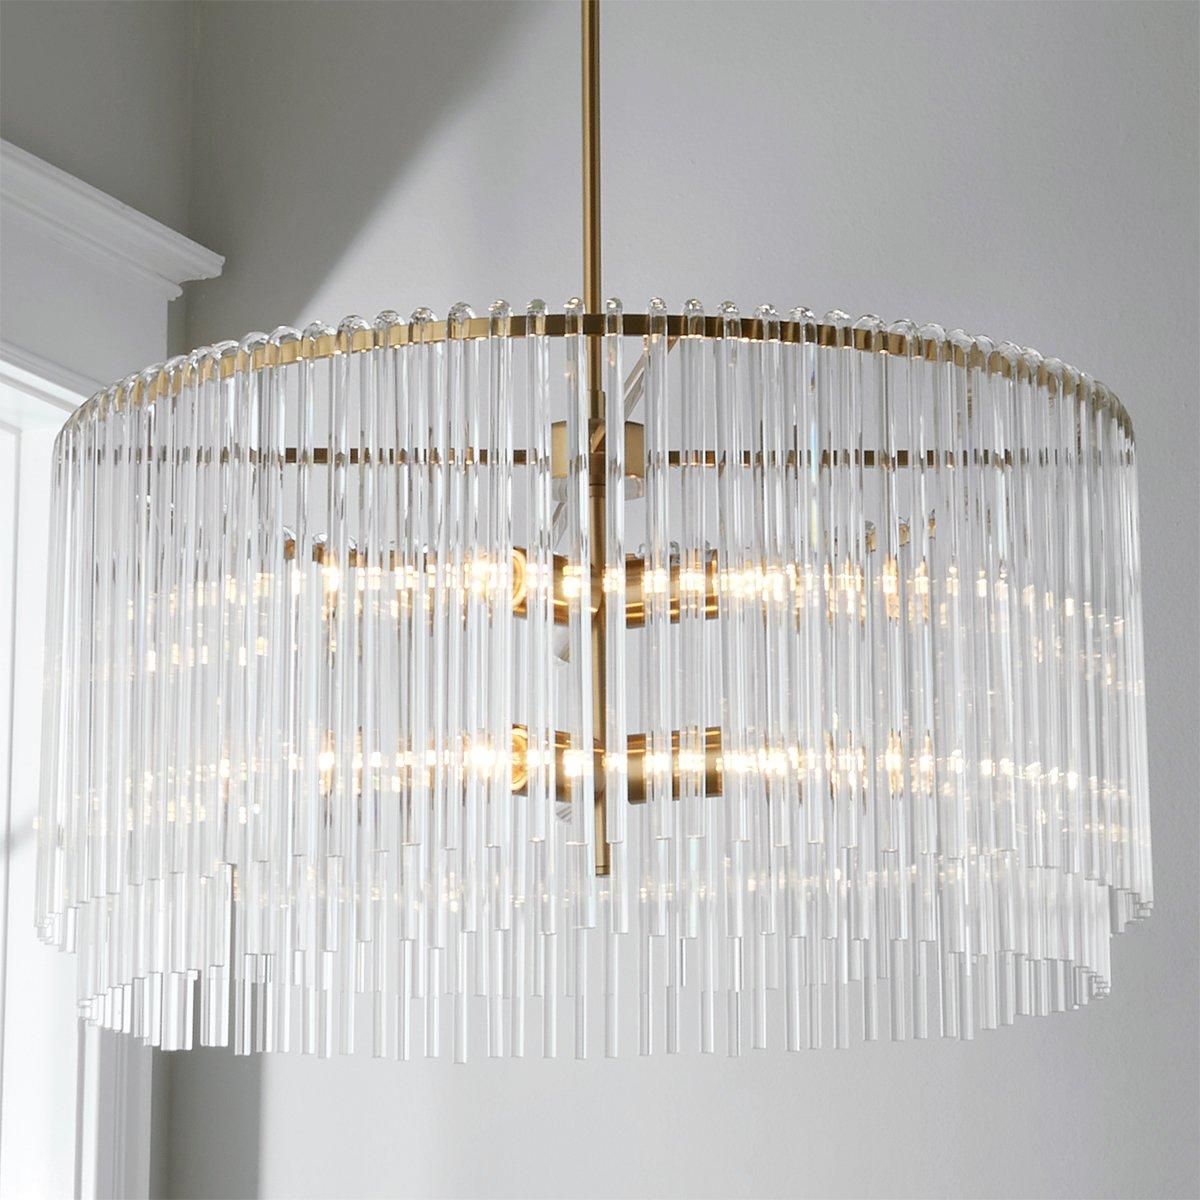 Glass-cicles Chandelier | Shades of Light